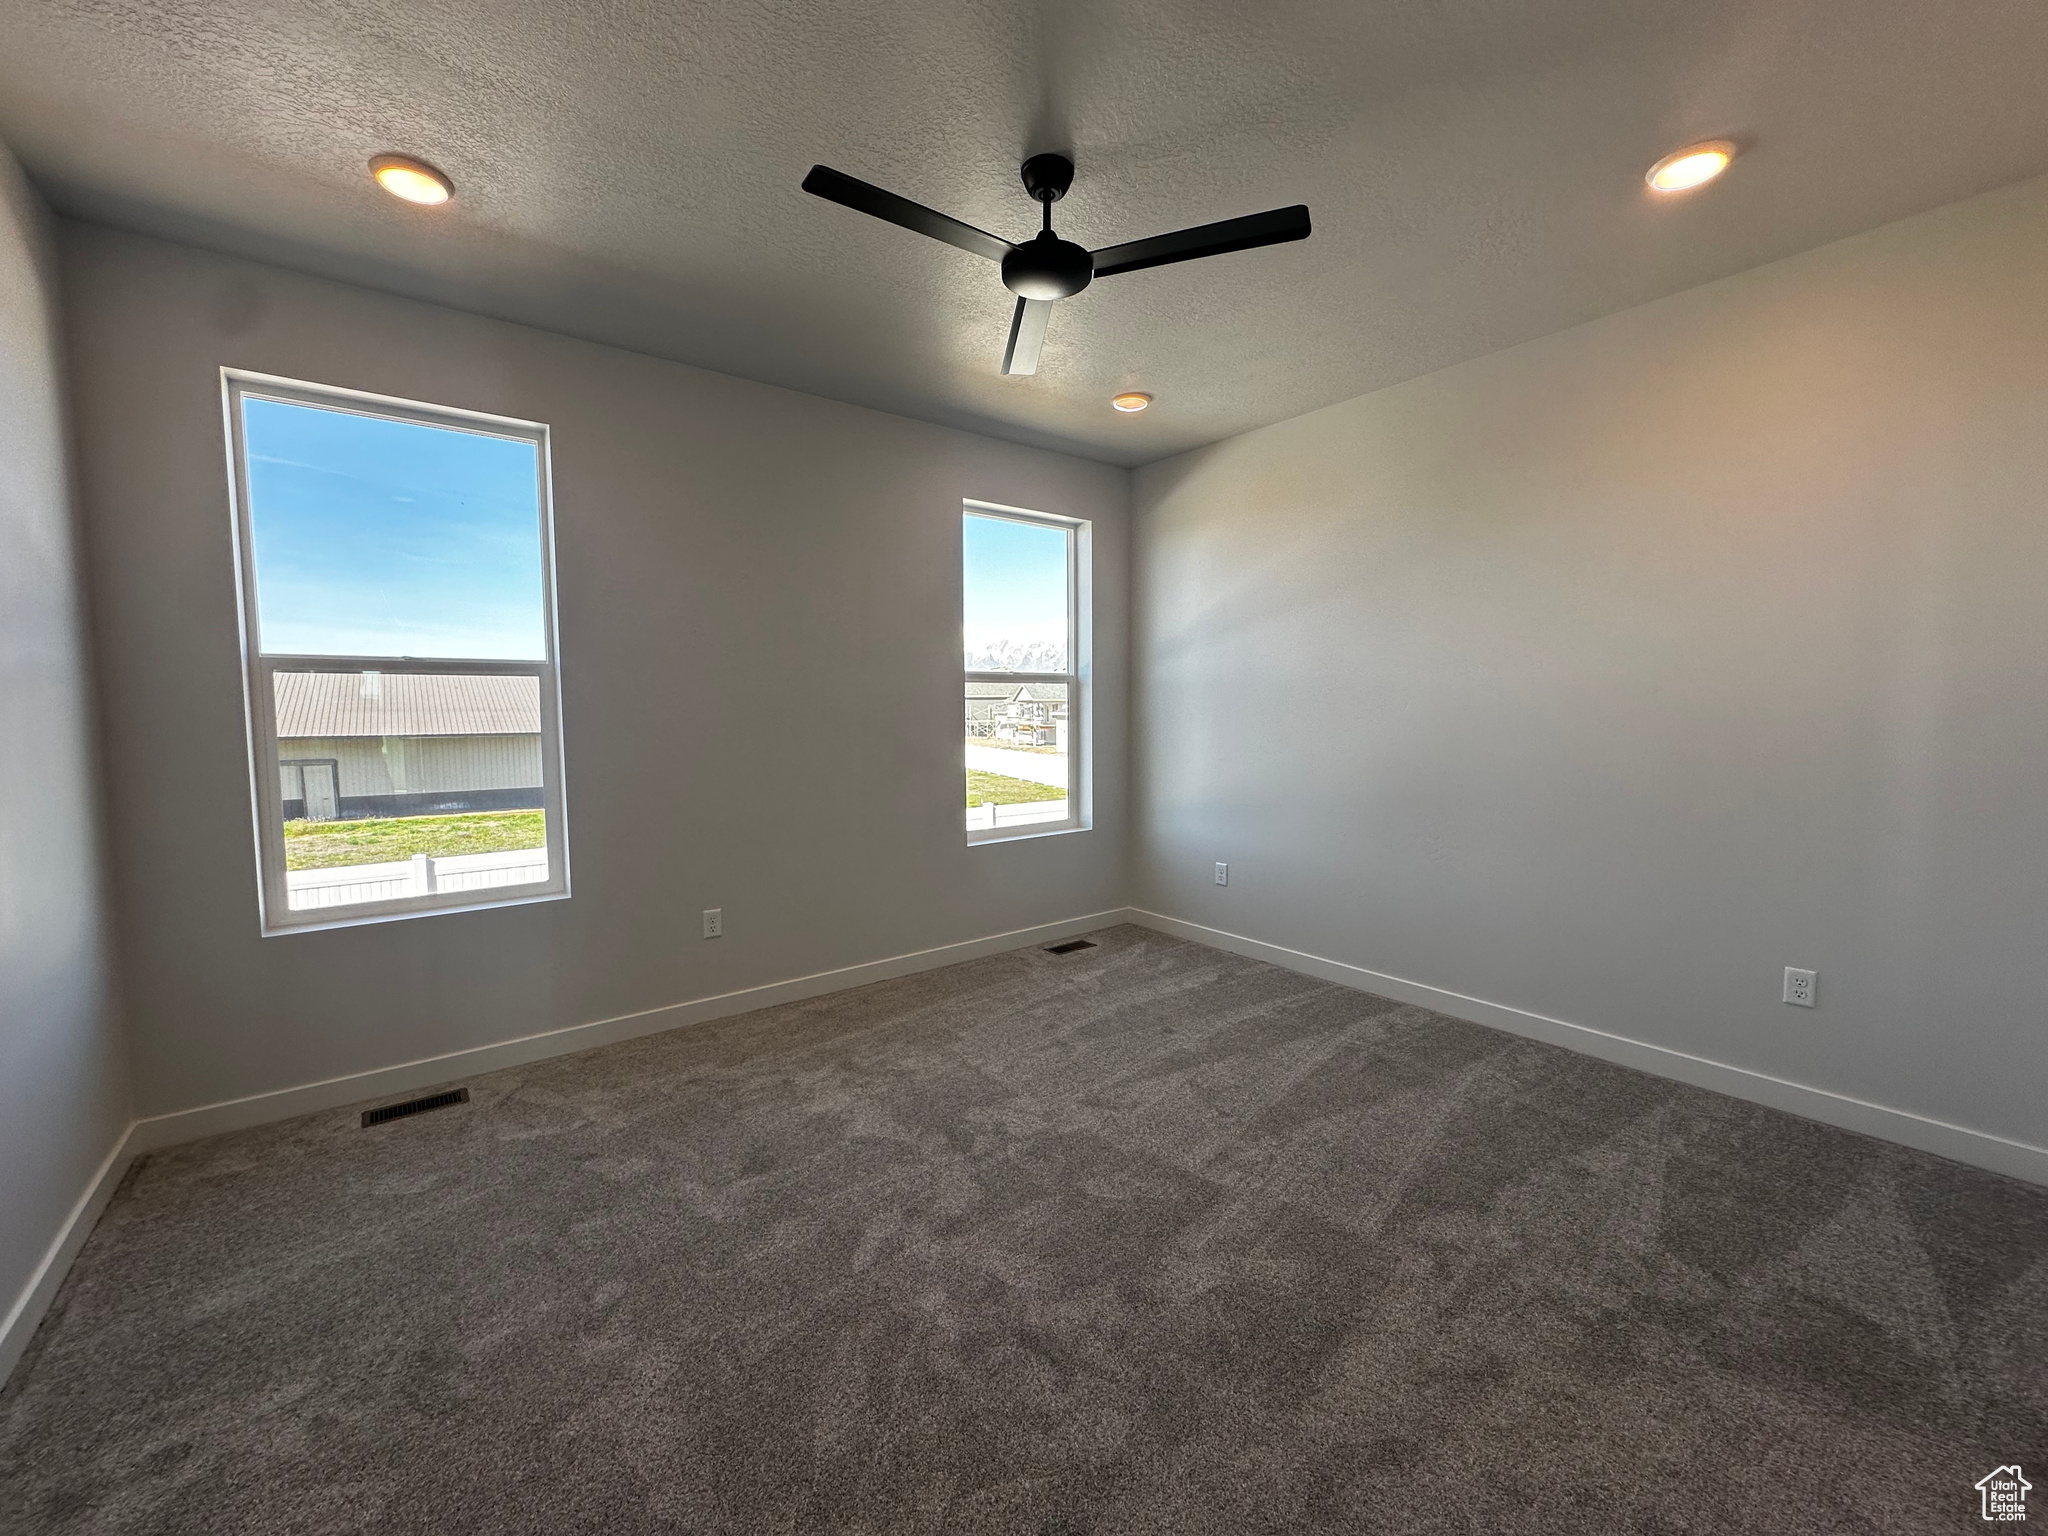 Empty room with ceiling fan, carpet floors, and a textured ceiling